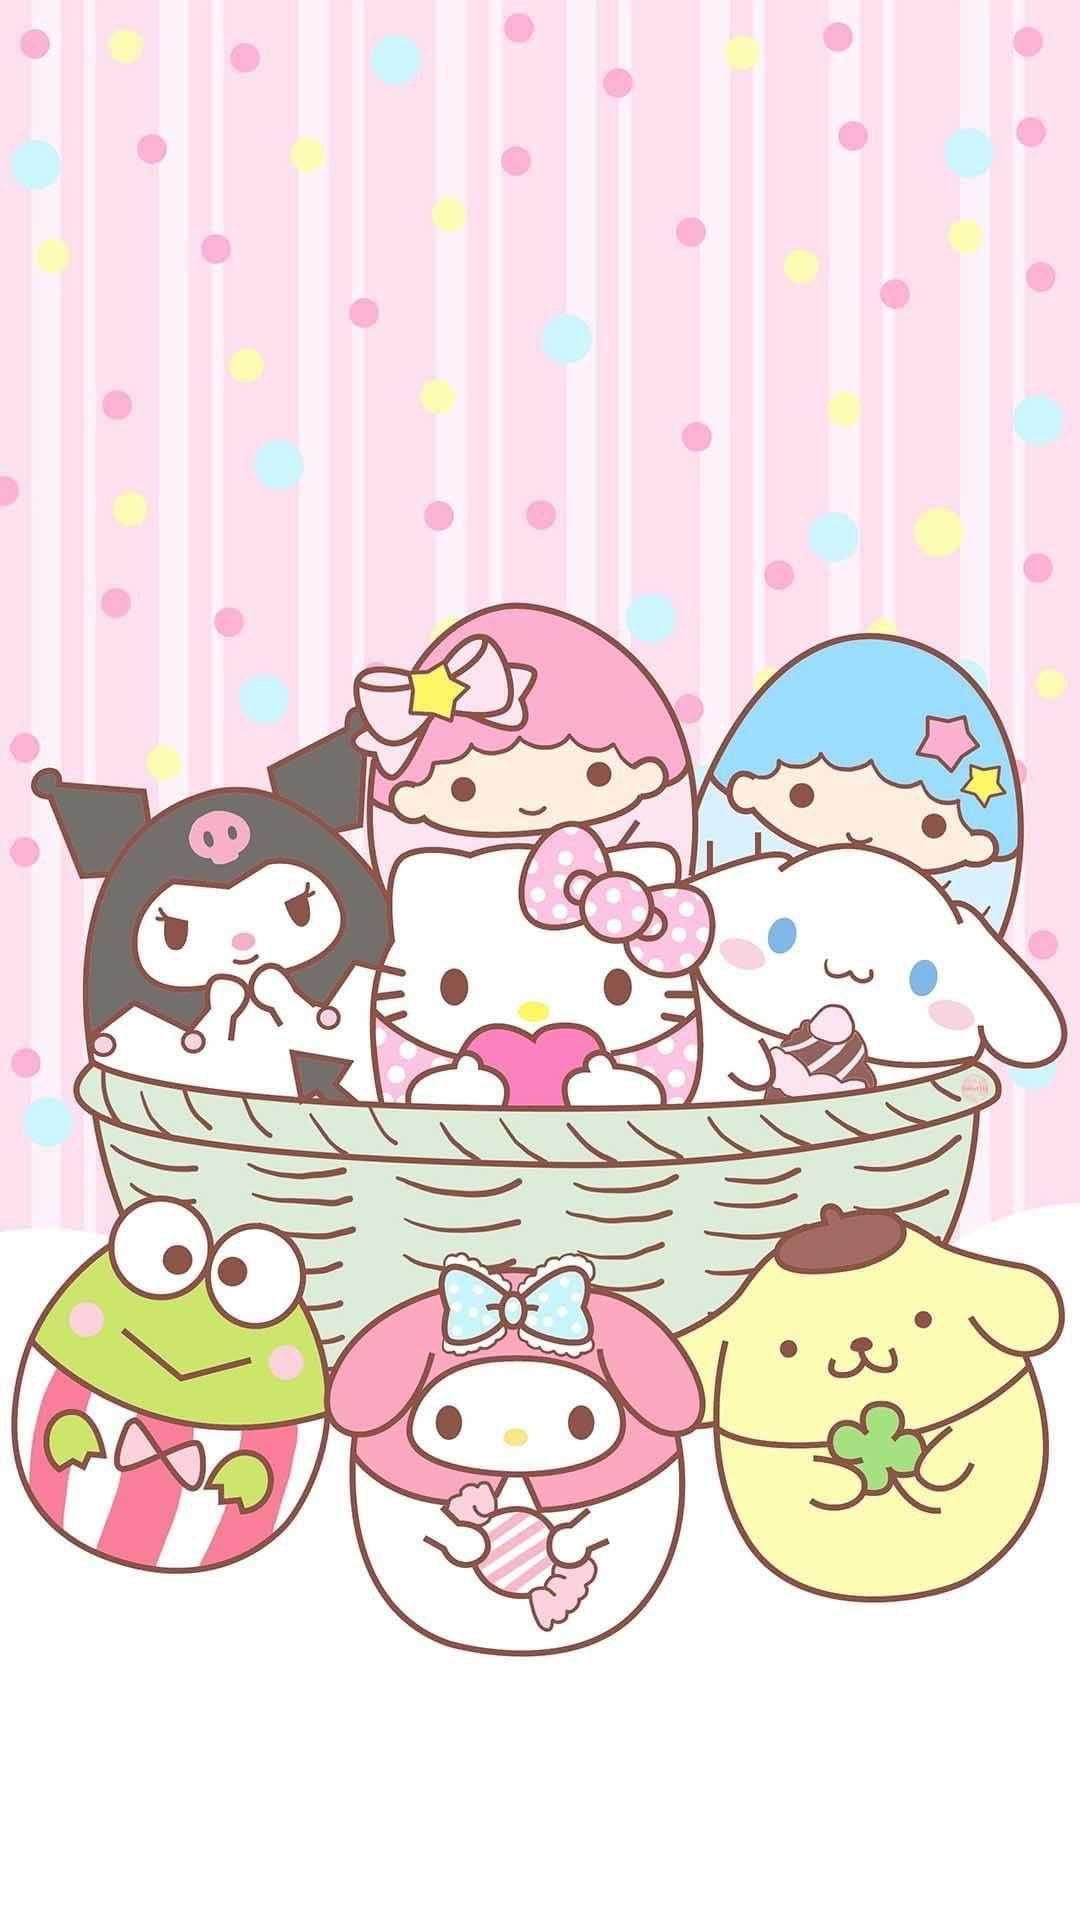 50+] Hello Kitty Wallpaper for iPhone